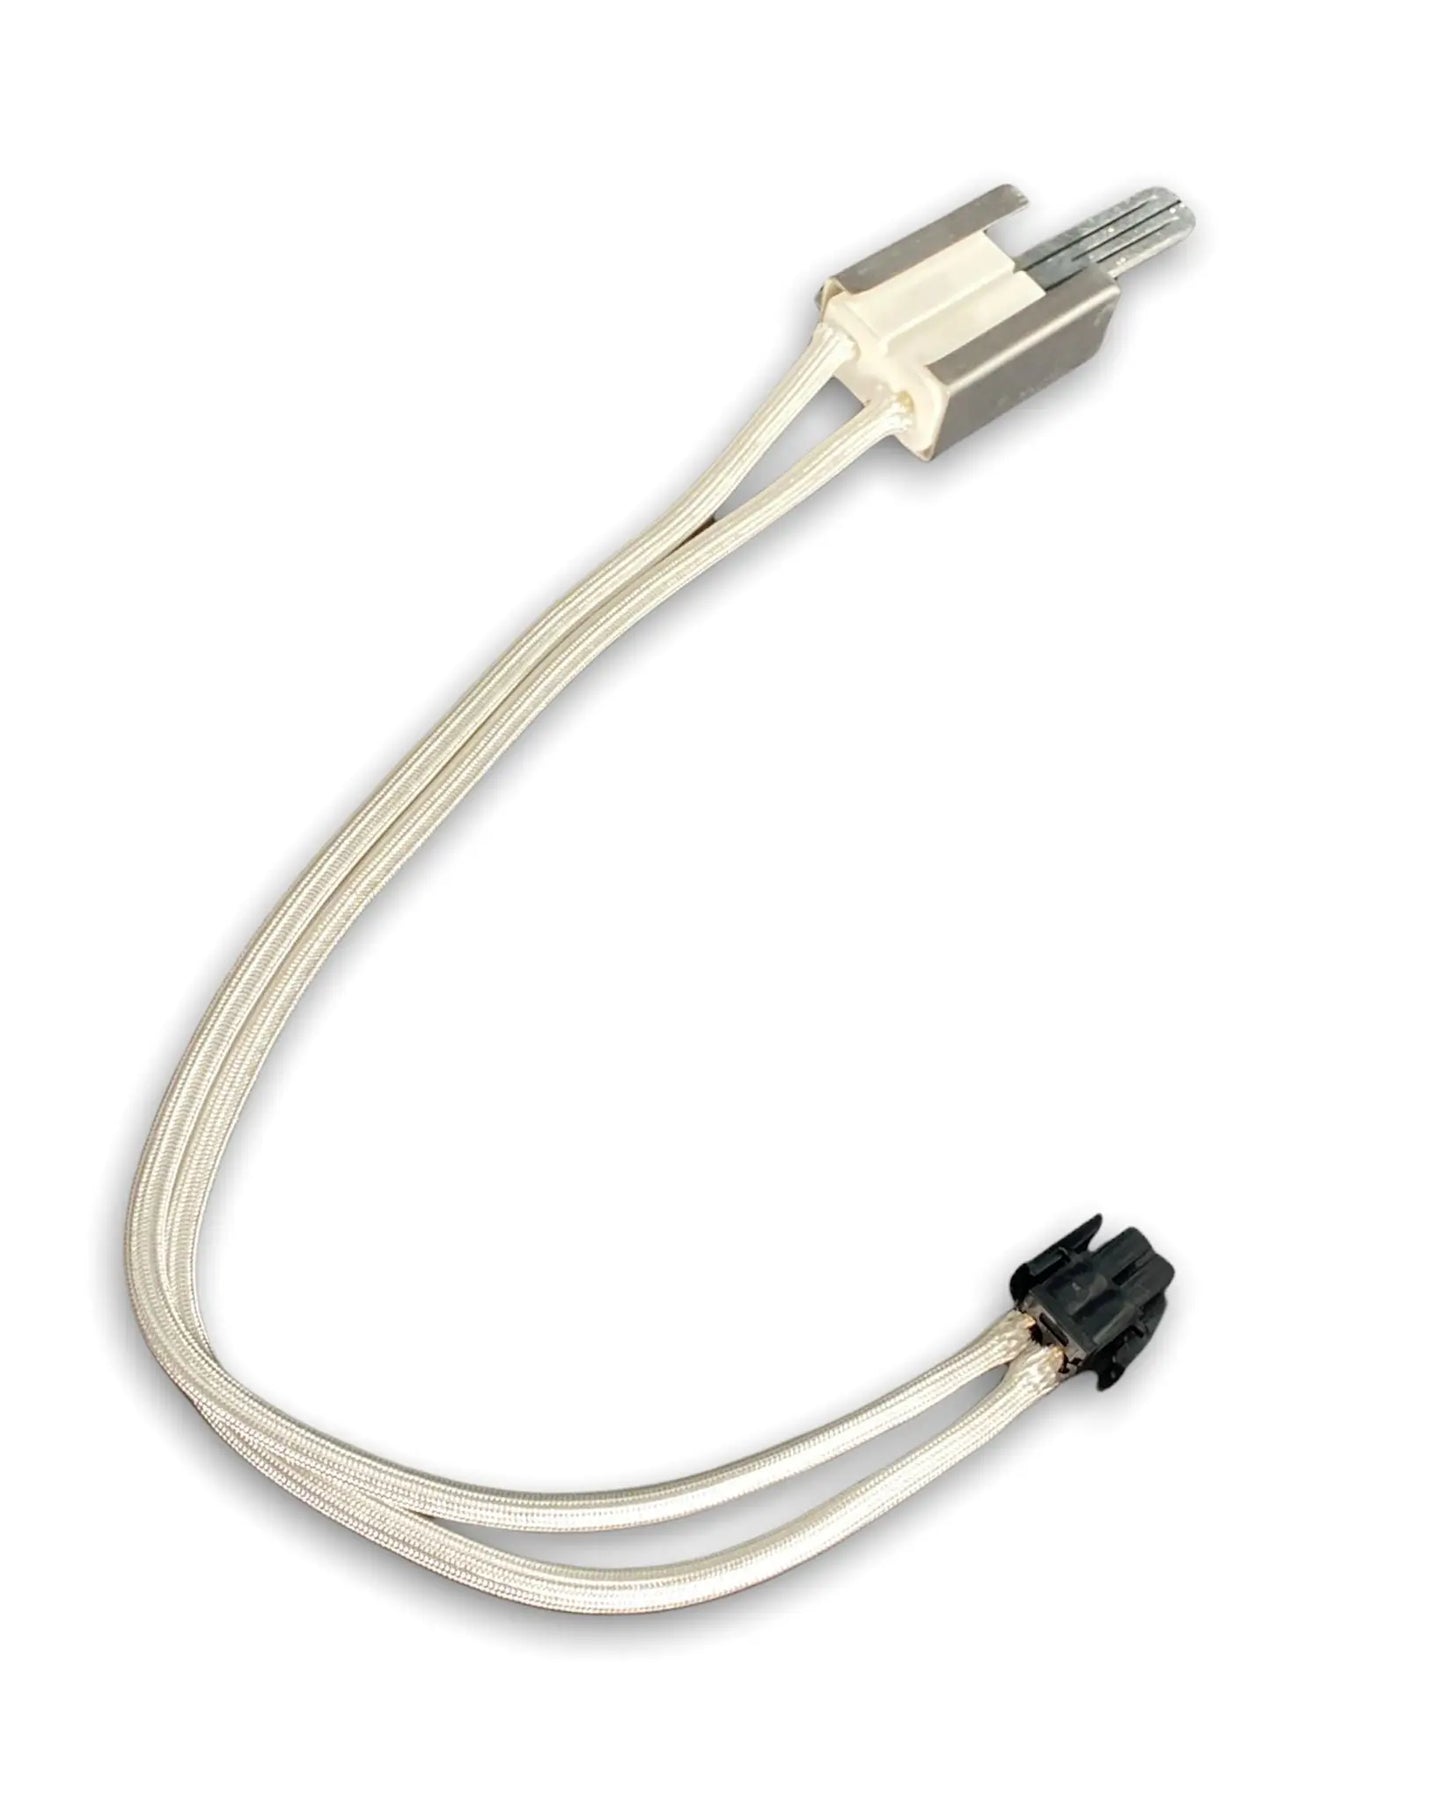 GE Range Flat Gas Igniter, Hot Surface - WB28X20446 , REPLACES: 3026526 AP5791227 PS8754784 EAP8754784 PD00045625 INVERTEC